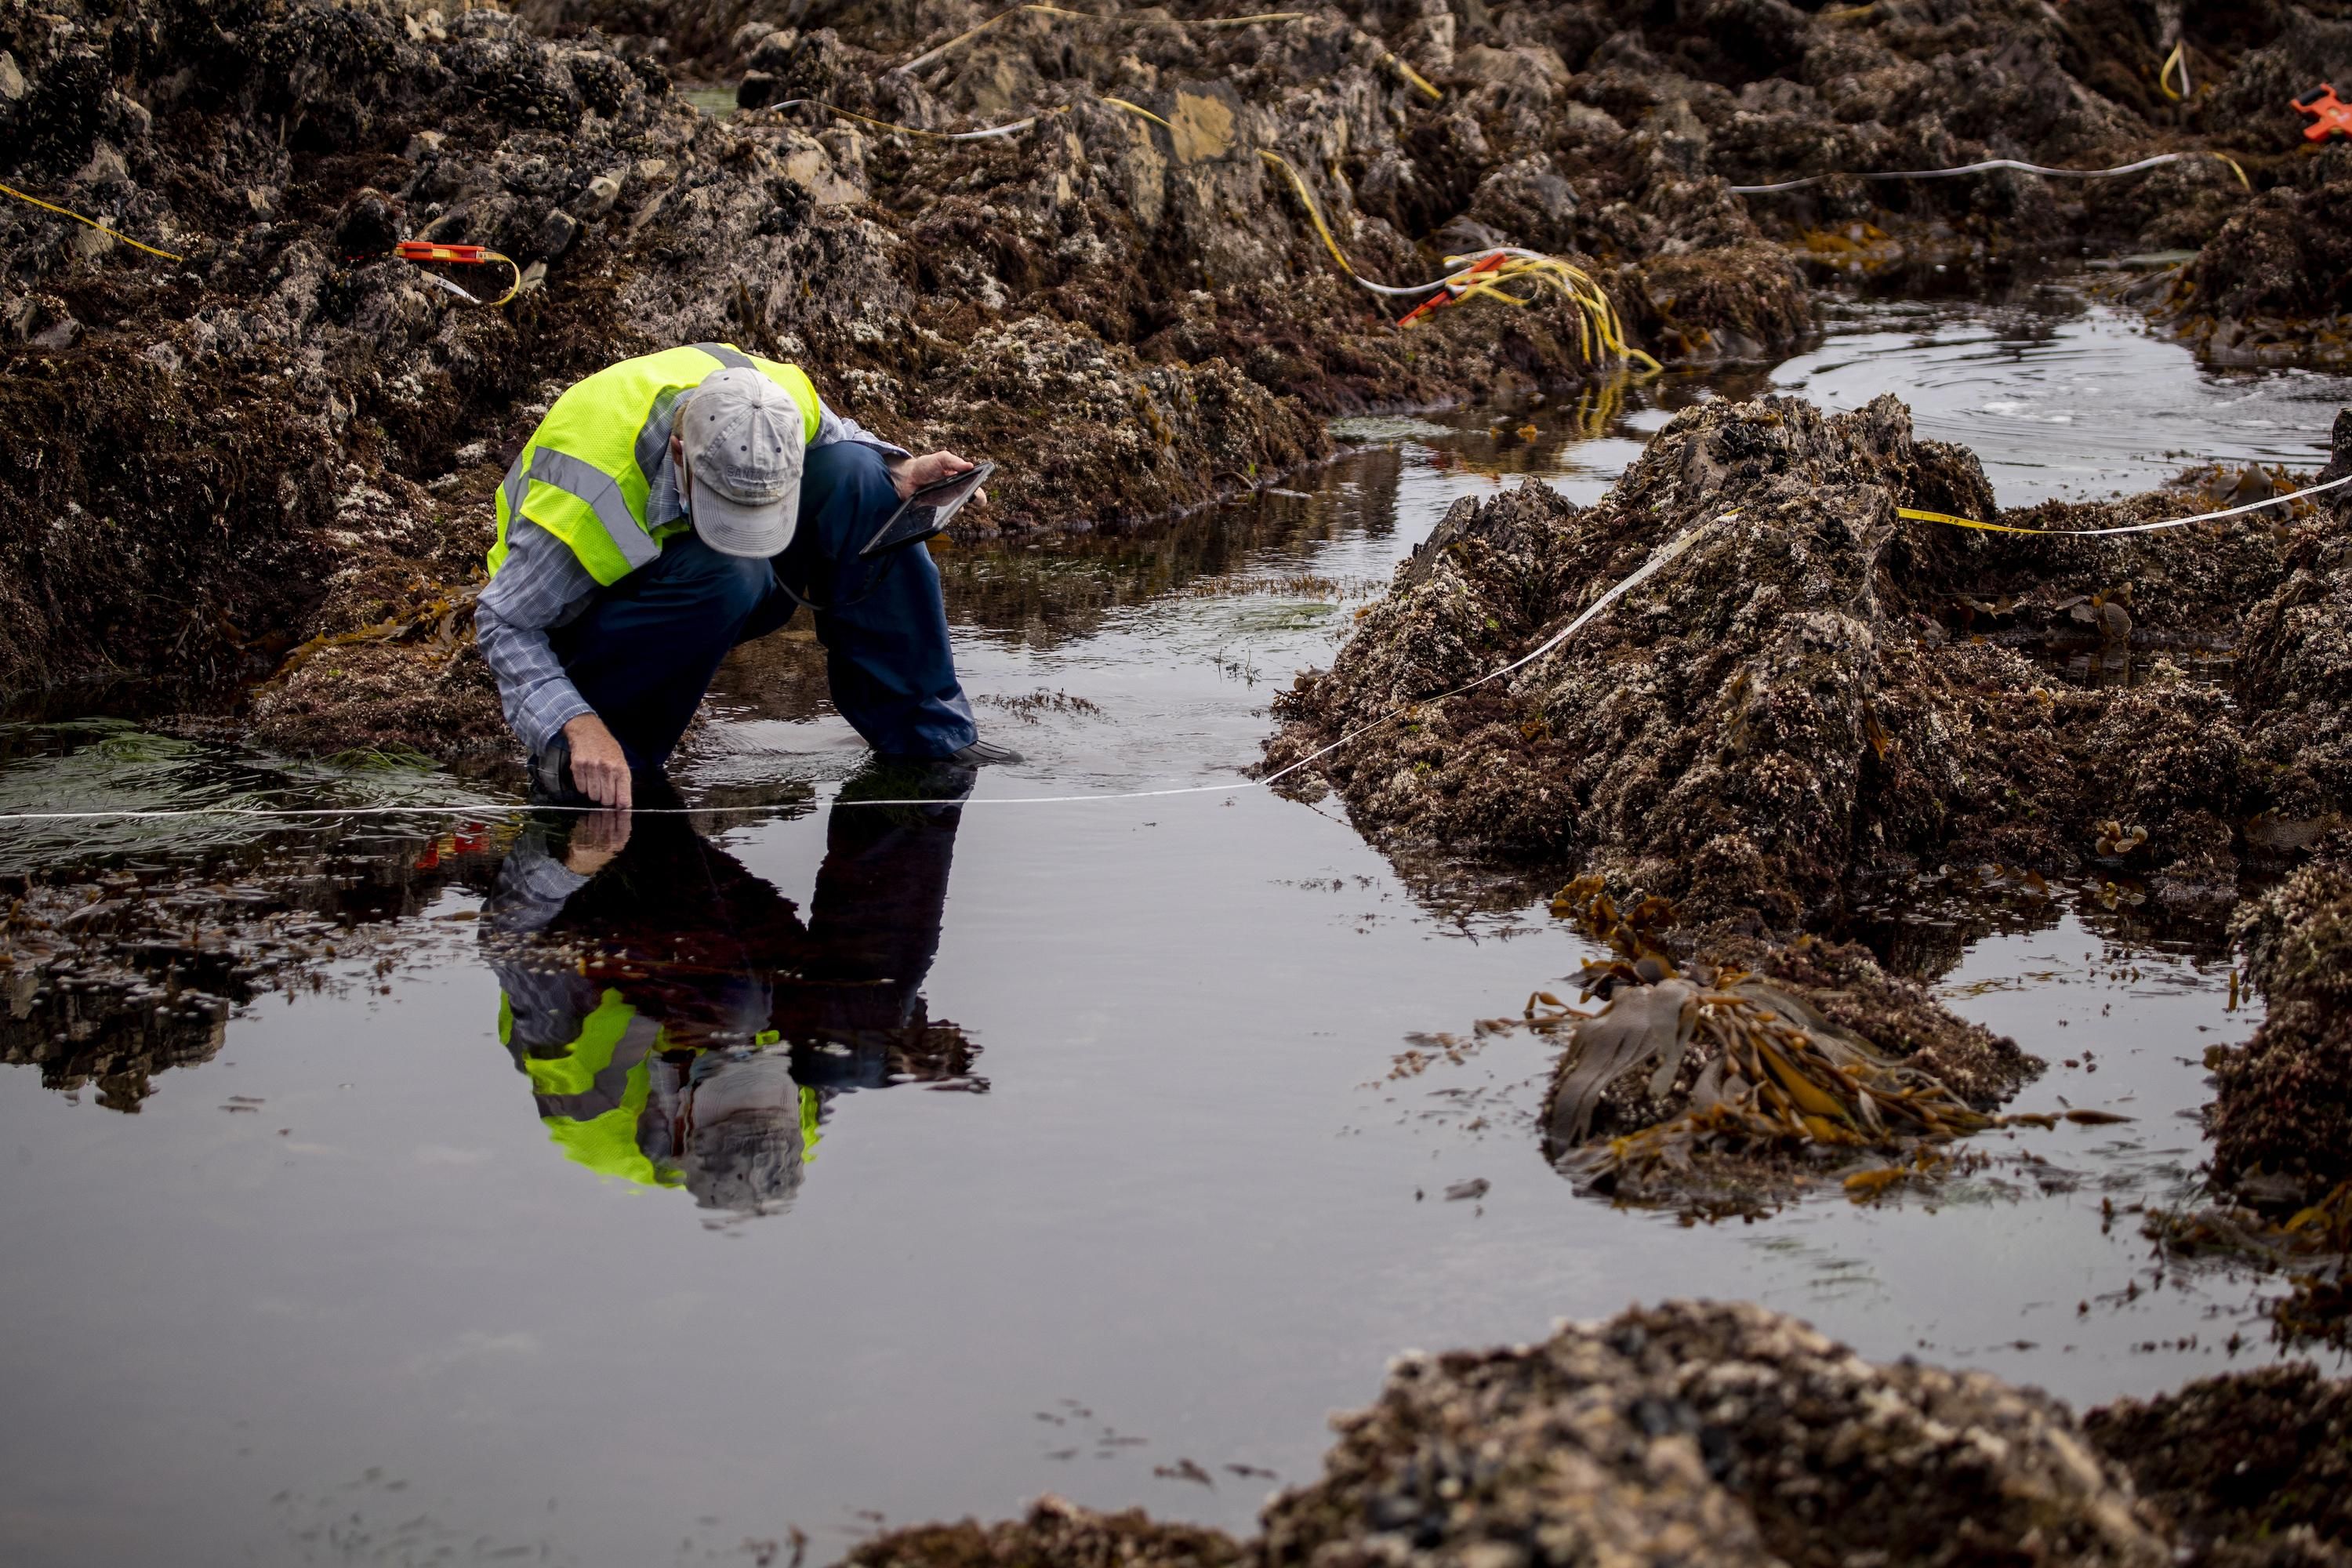 Biologists assessed the overall biological habitat by counting and categorizing biodiversity of the Little Corona del Mar tide pools, part of the Crystal Cove State Marine Conservation Area Wednesday, Oct. 6, 2021 in Newport Beach, California.